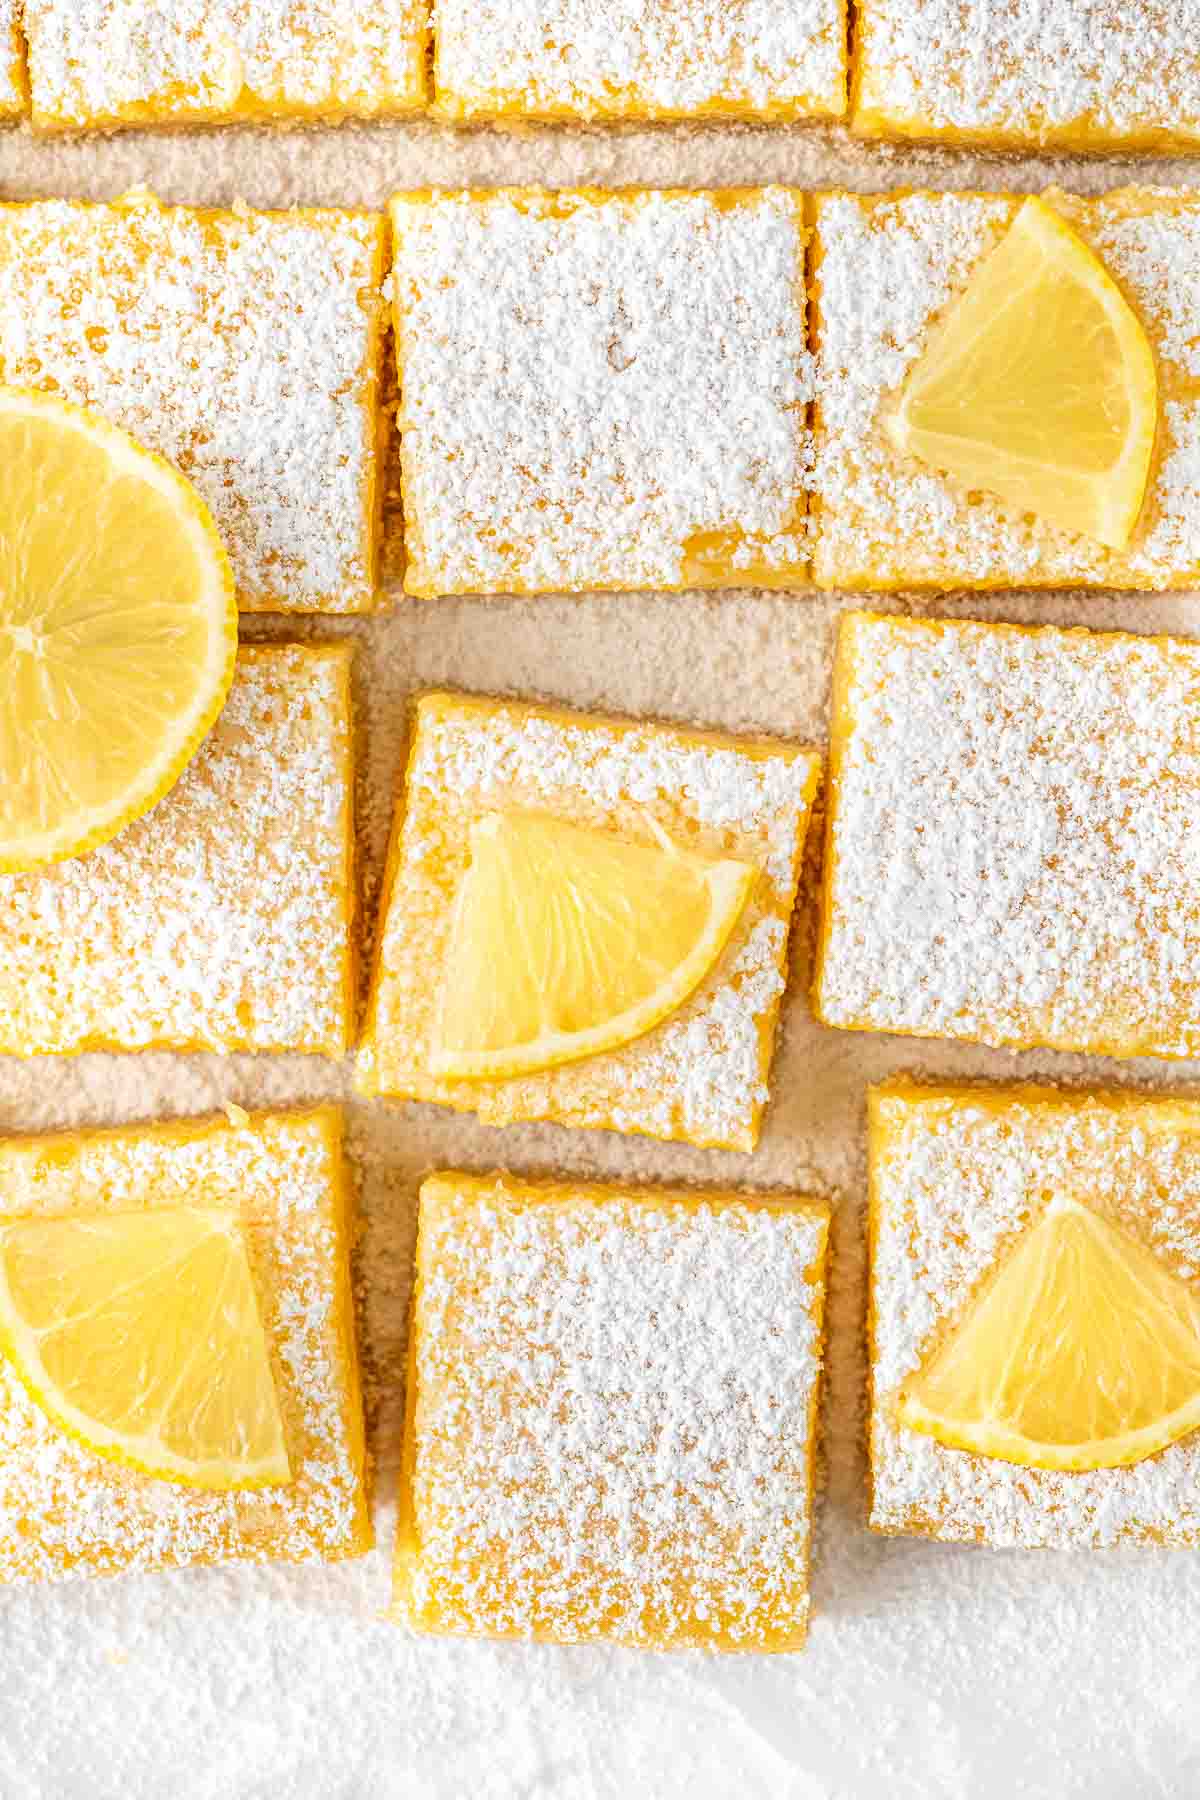 Dairy free lemon bars cut into squares with icing sugar and lemon slices.